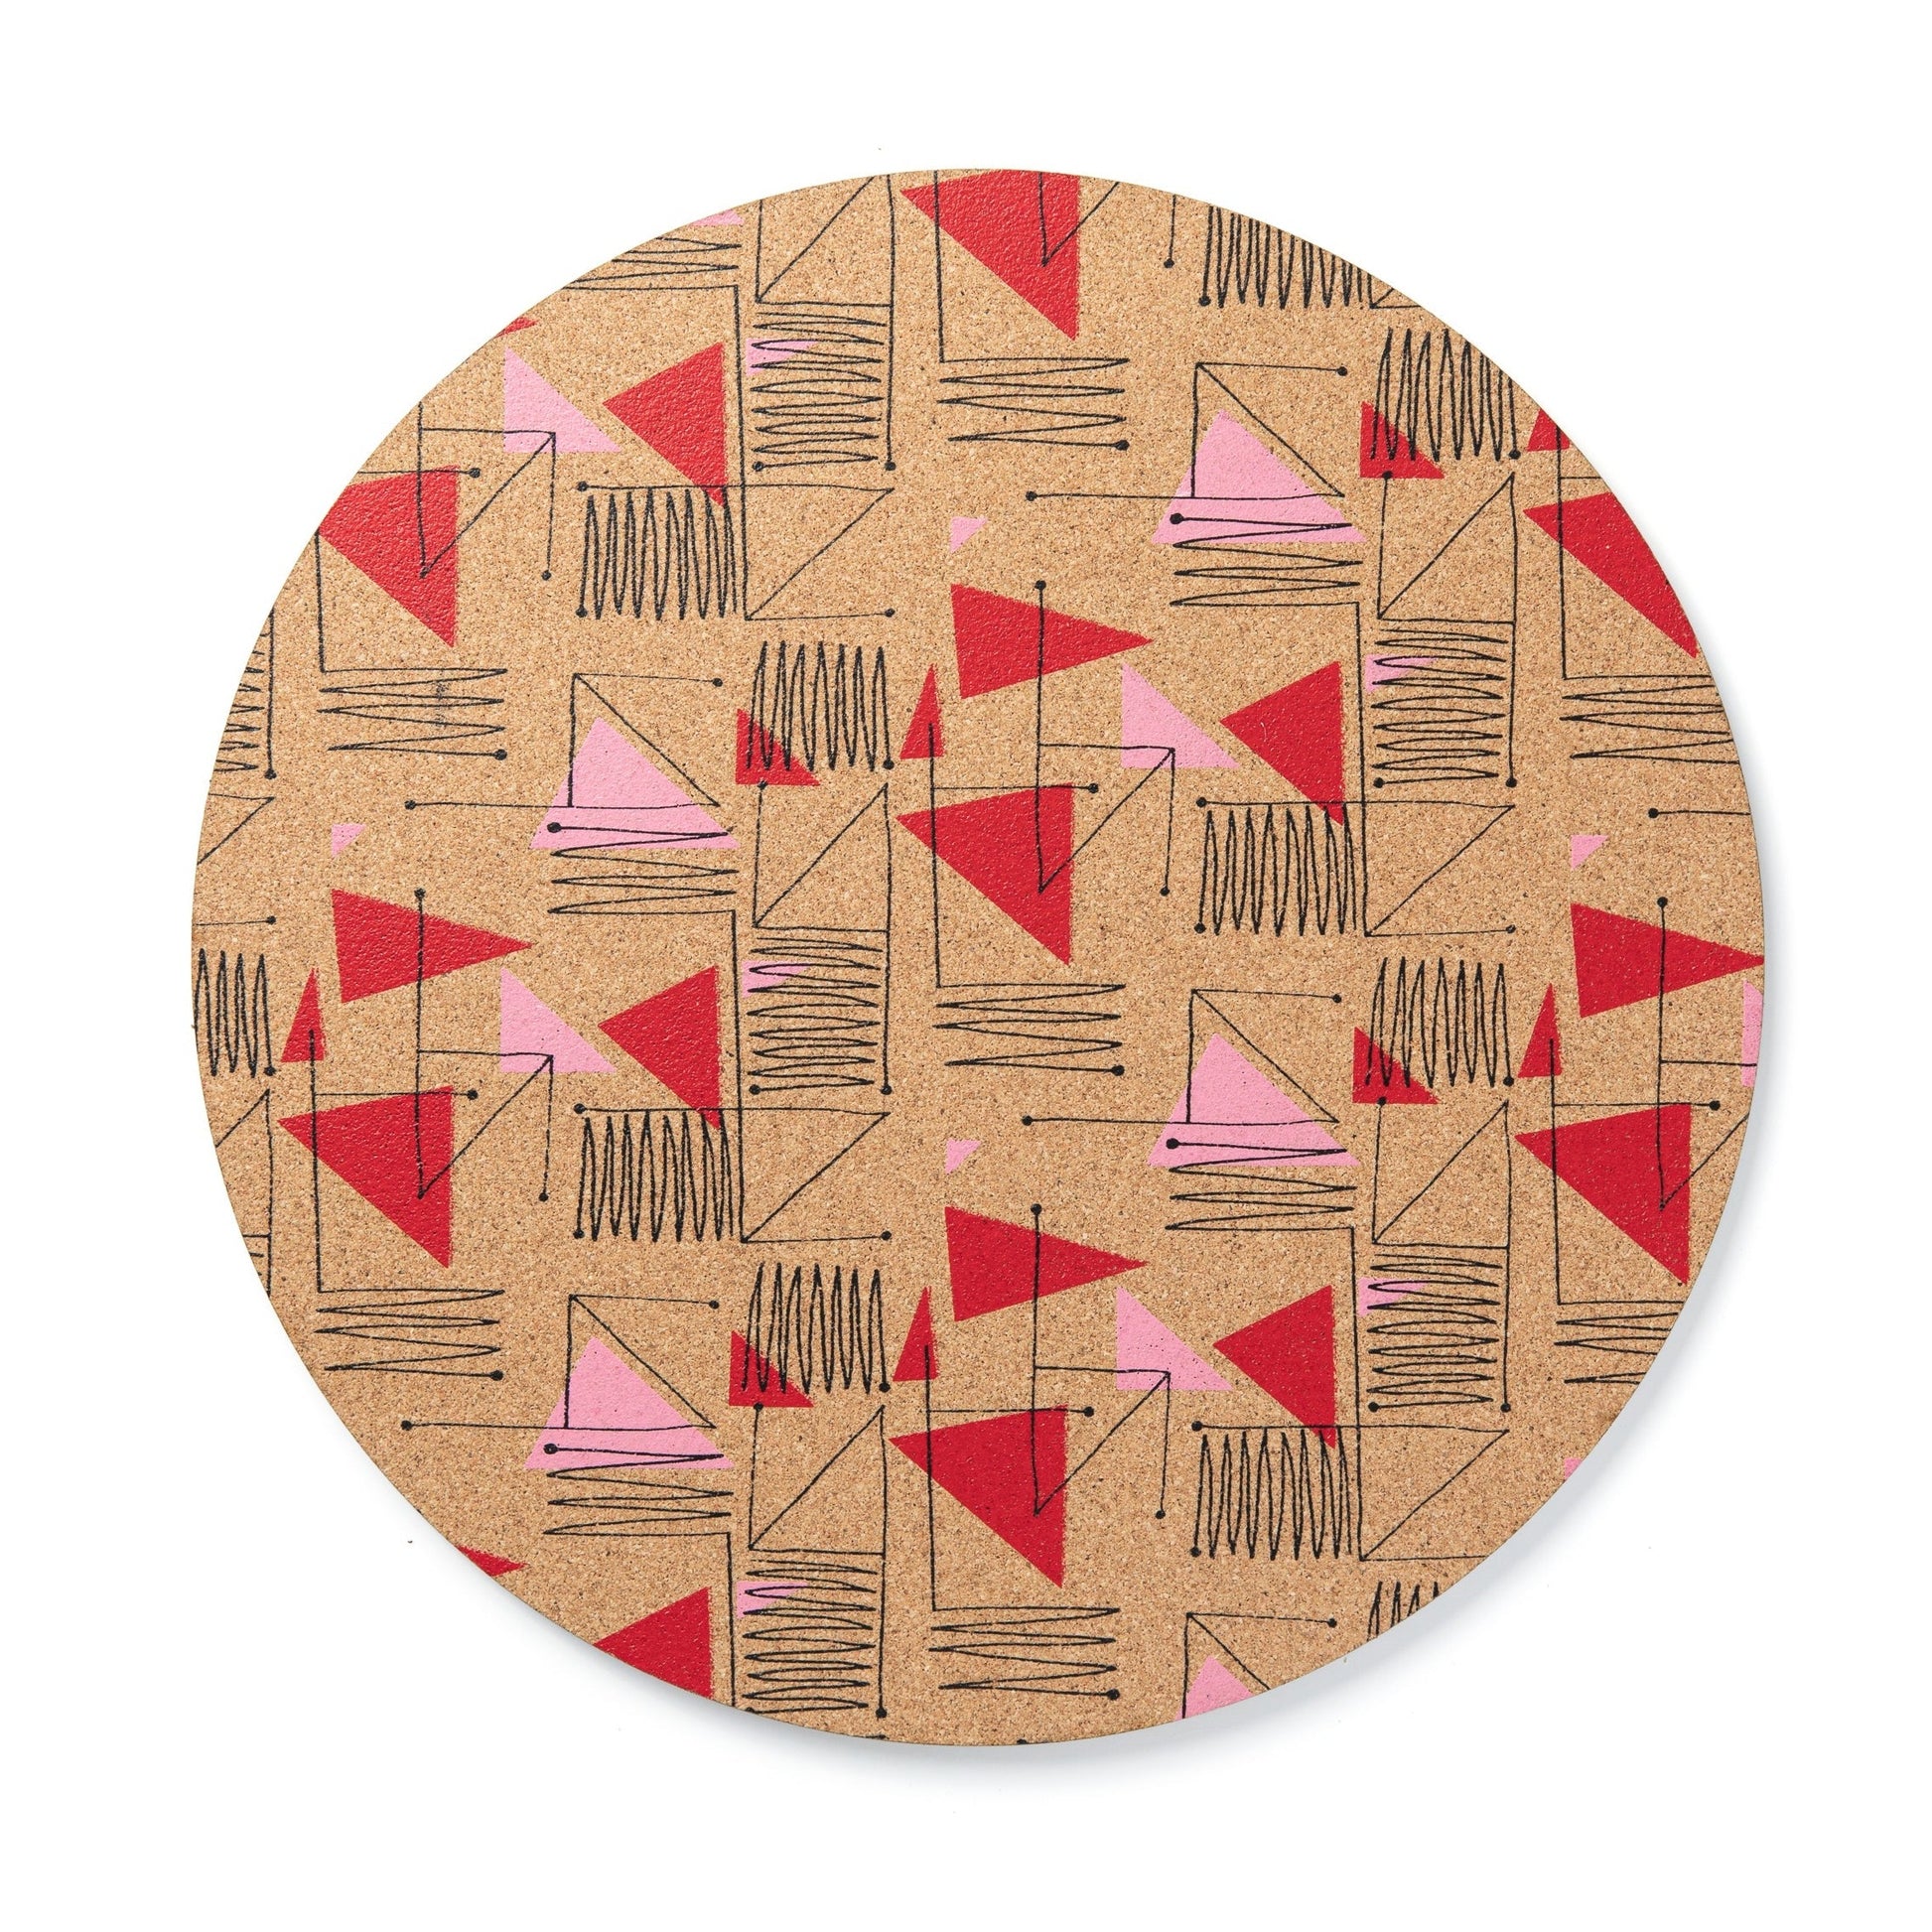 A 1950's inspired surface pattern design, red and pink is screen printed onto cork to create a colourful and stylish placemat for dining.